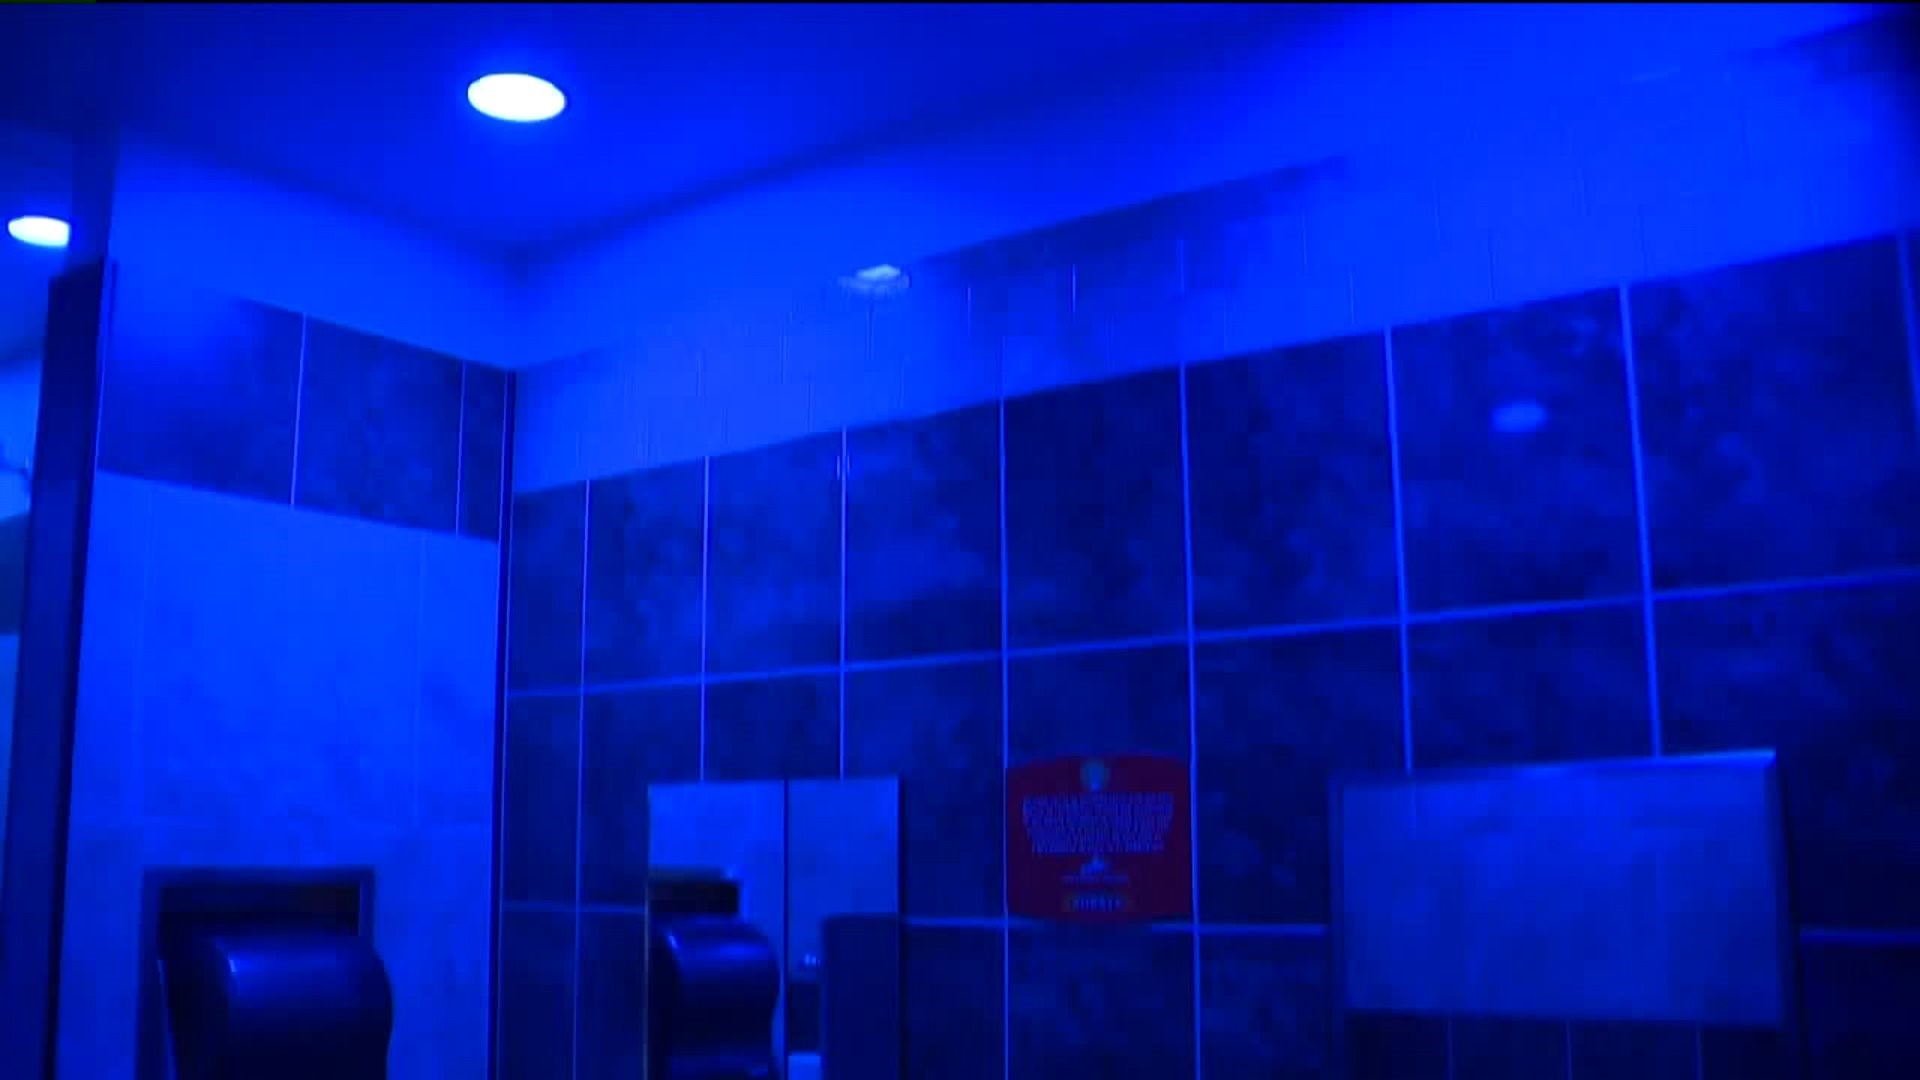 Locals React to Sheetz Using Blue Lights to Deter Drug Use